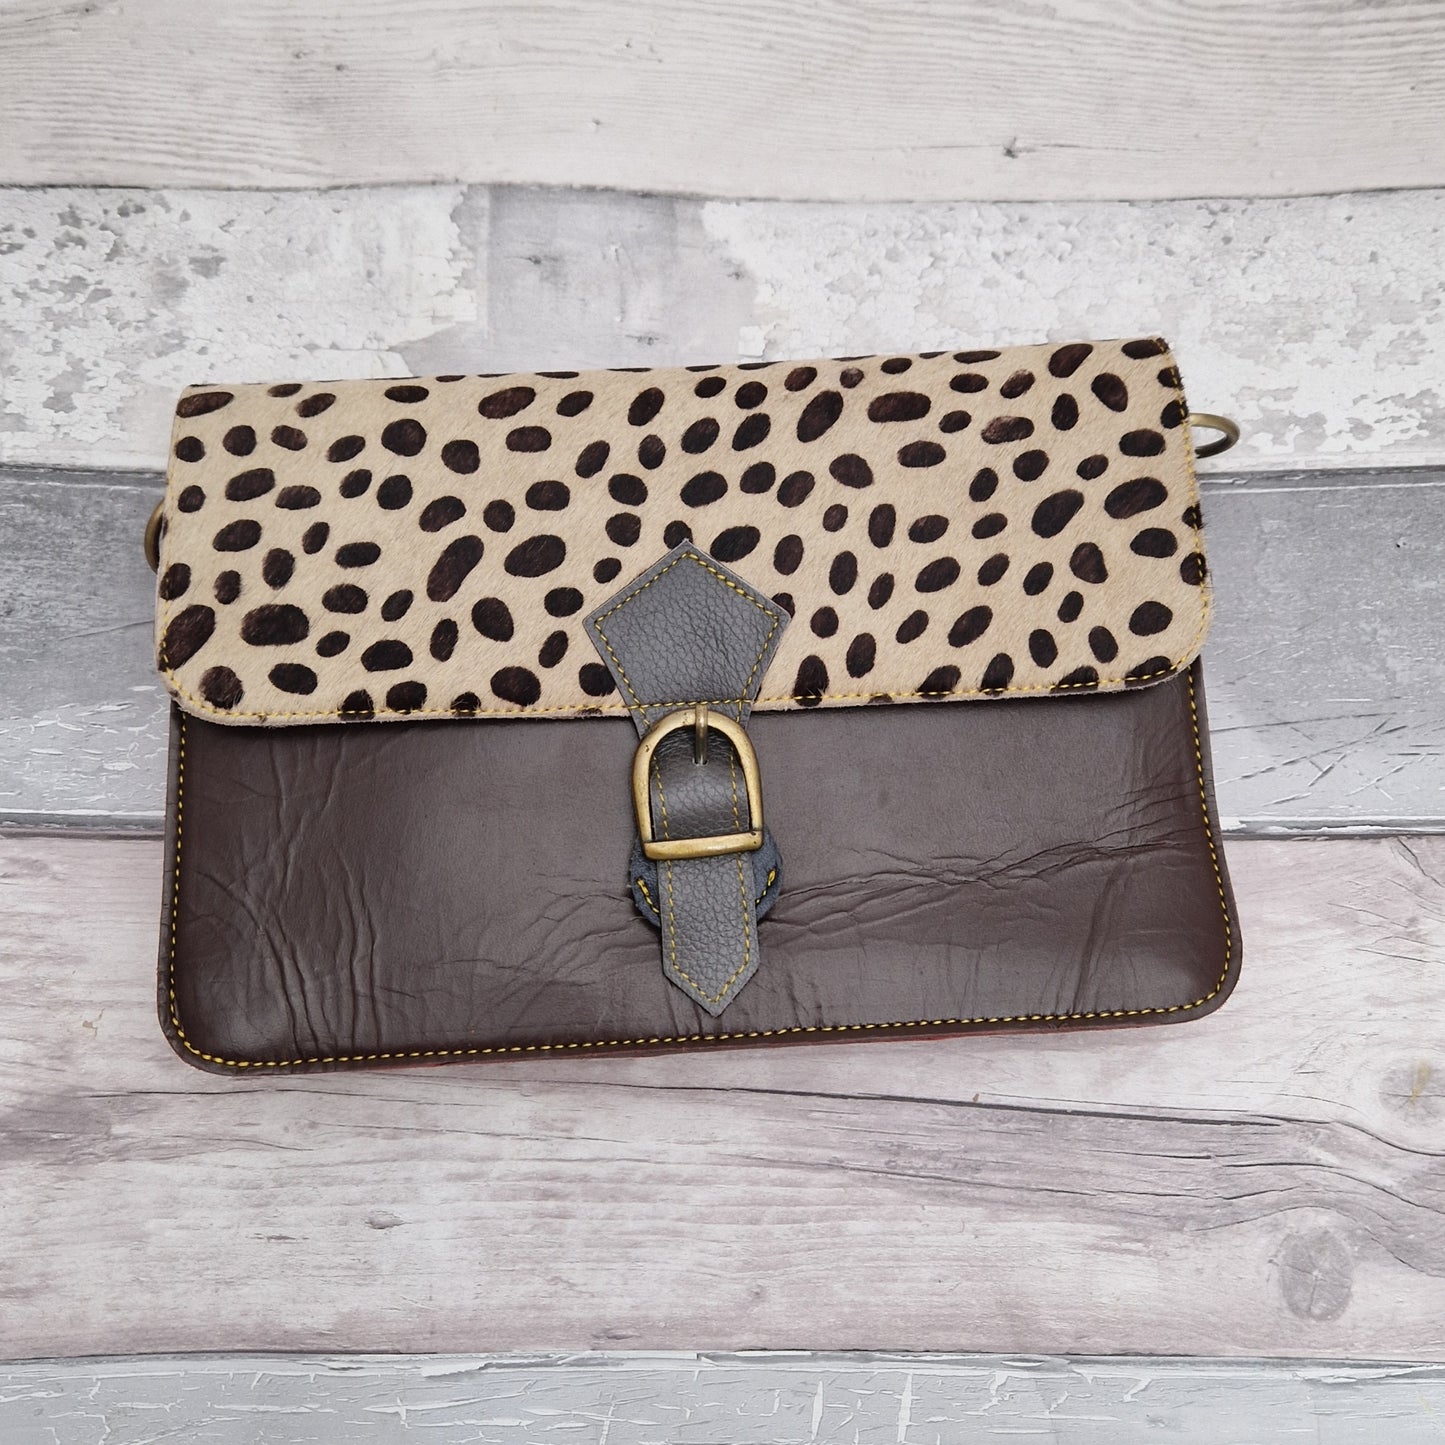 Chocolate coloured leather bag with a textured spotty print panel.